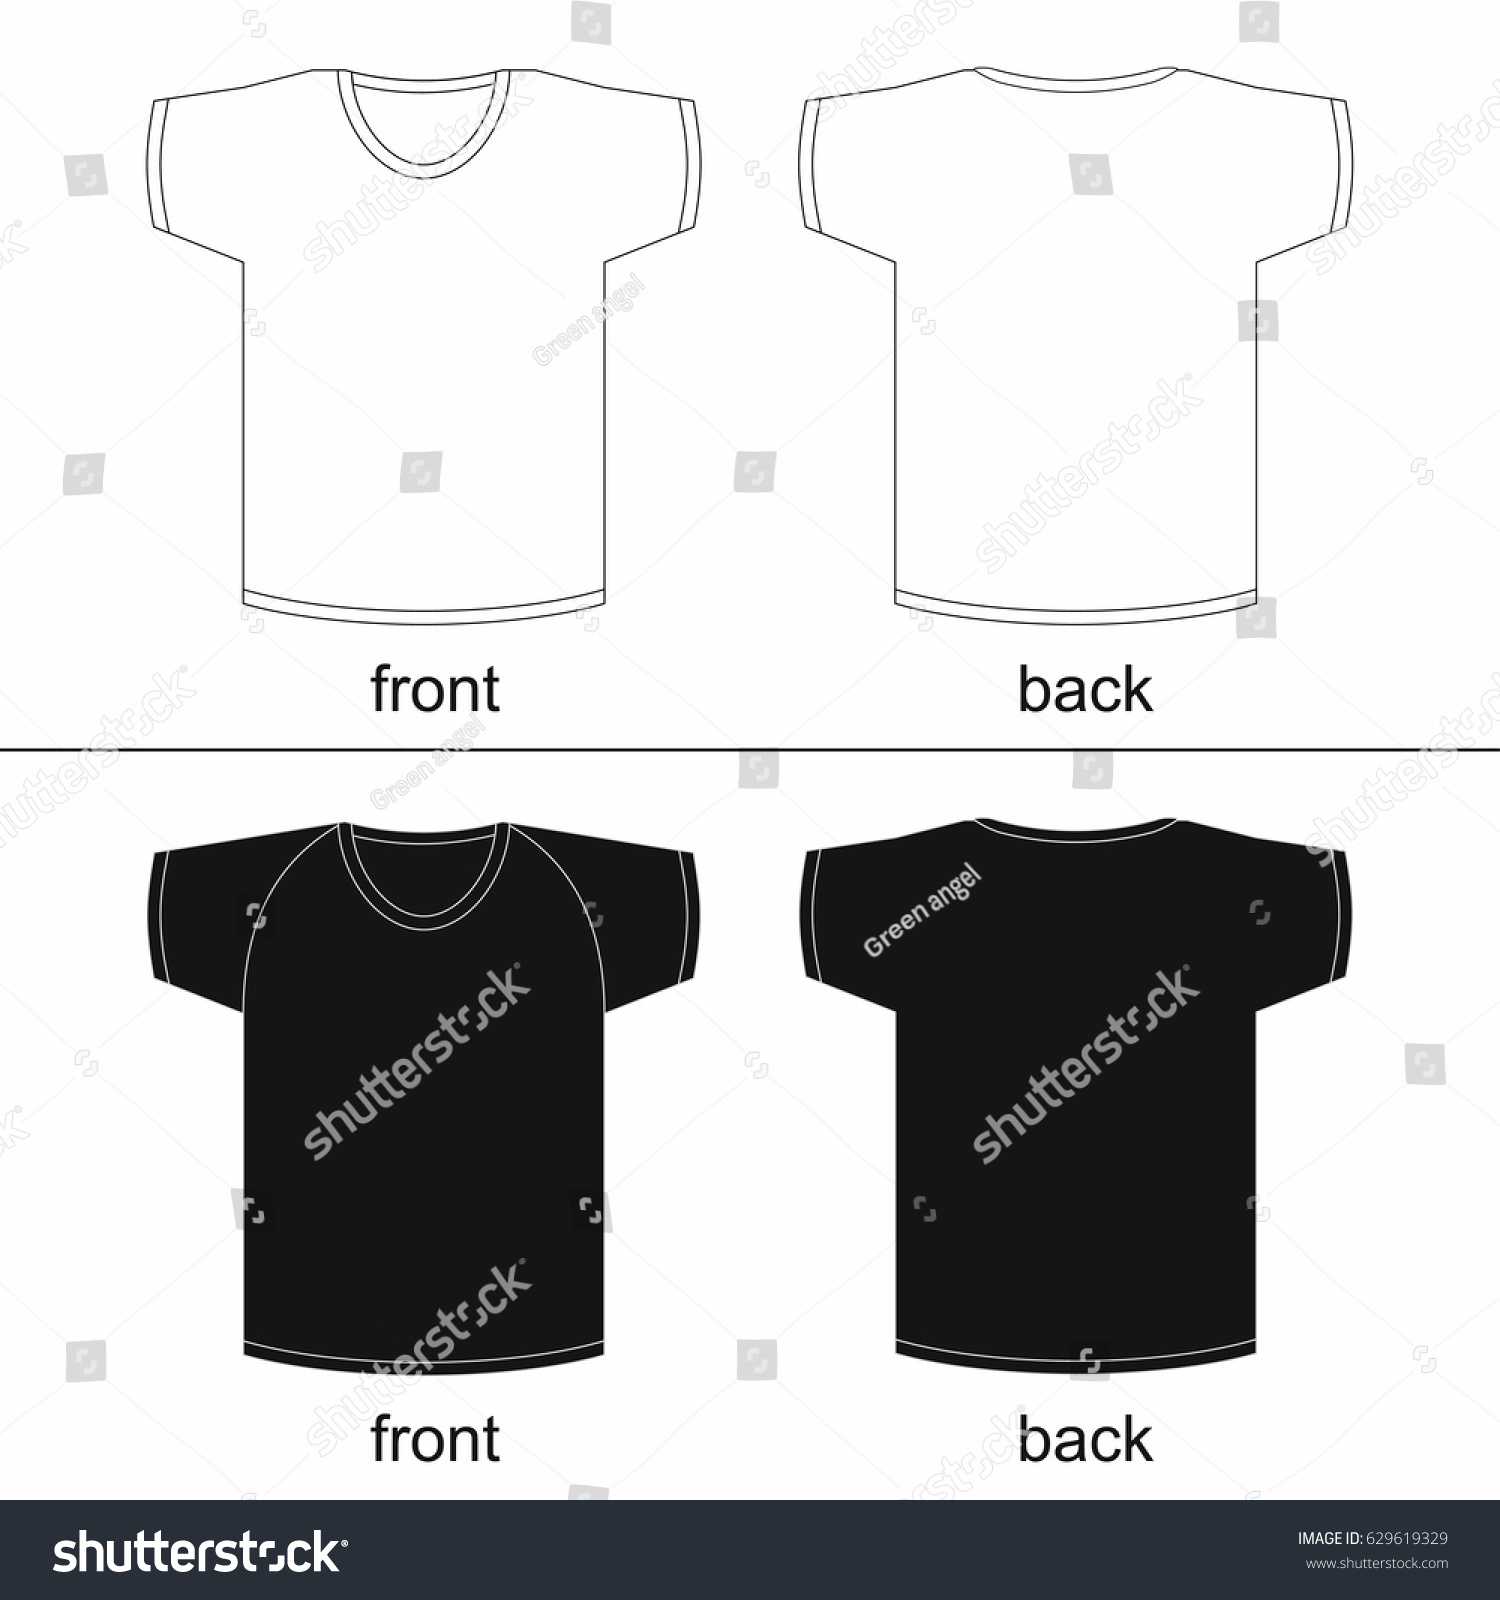 Blank Tshirt Template Front Back Printable Stock Vector For Printable Blank Tshirt Template